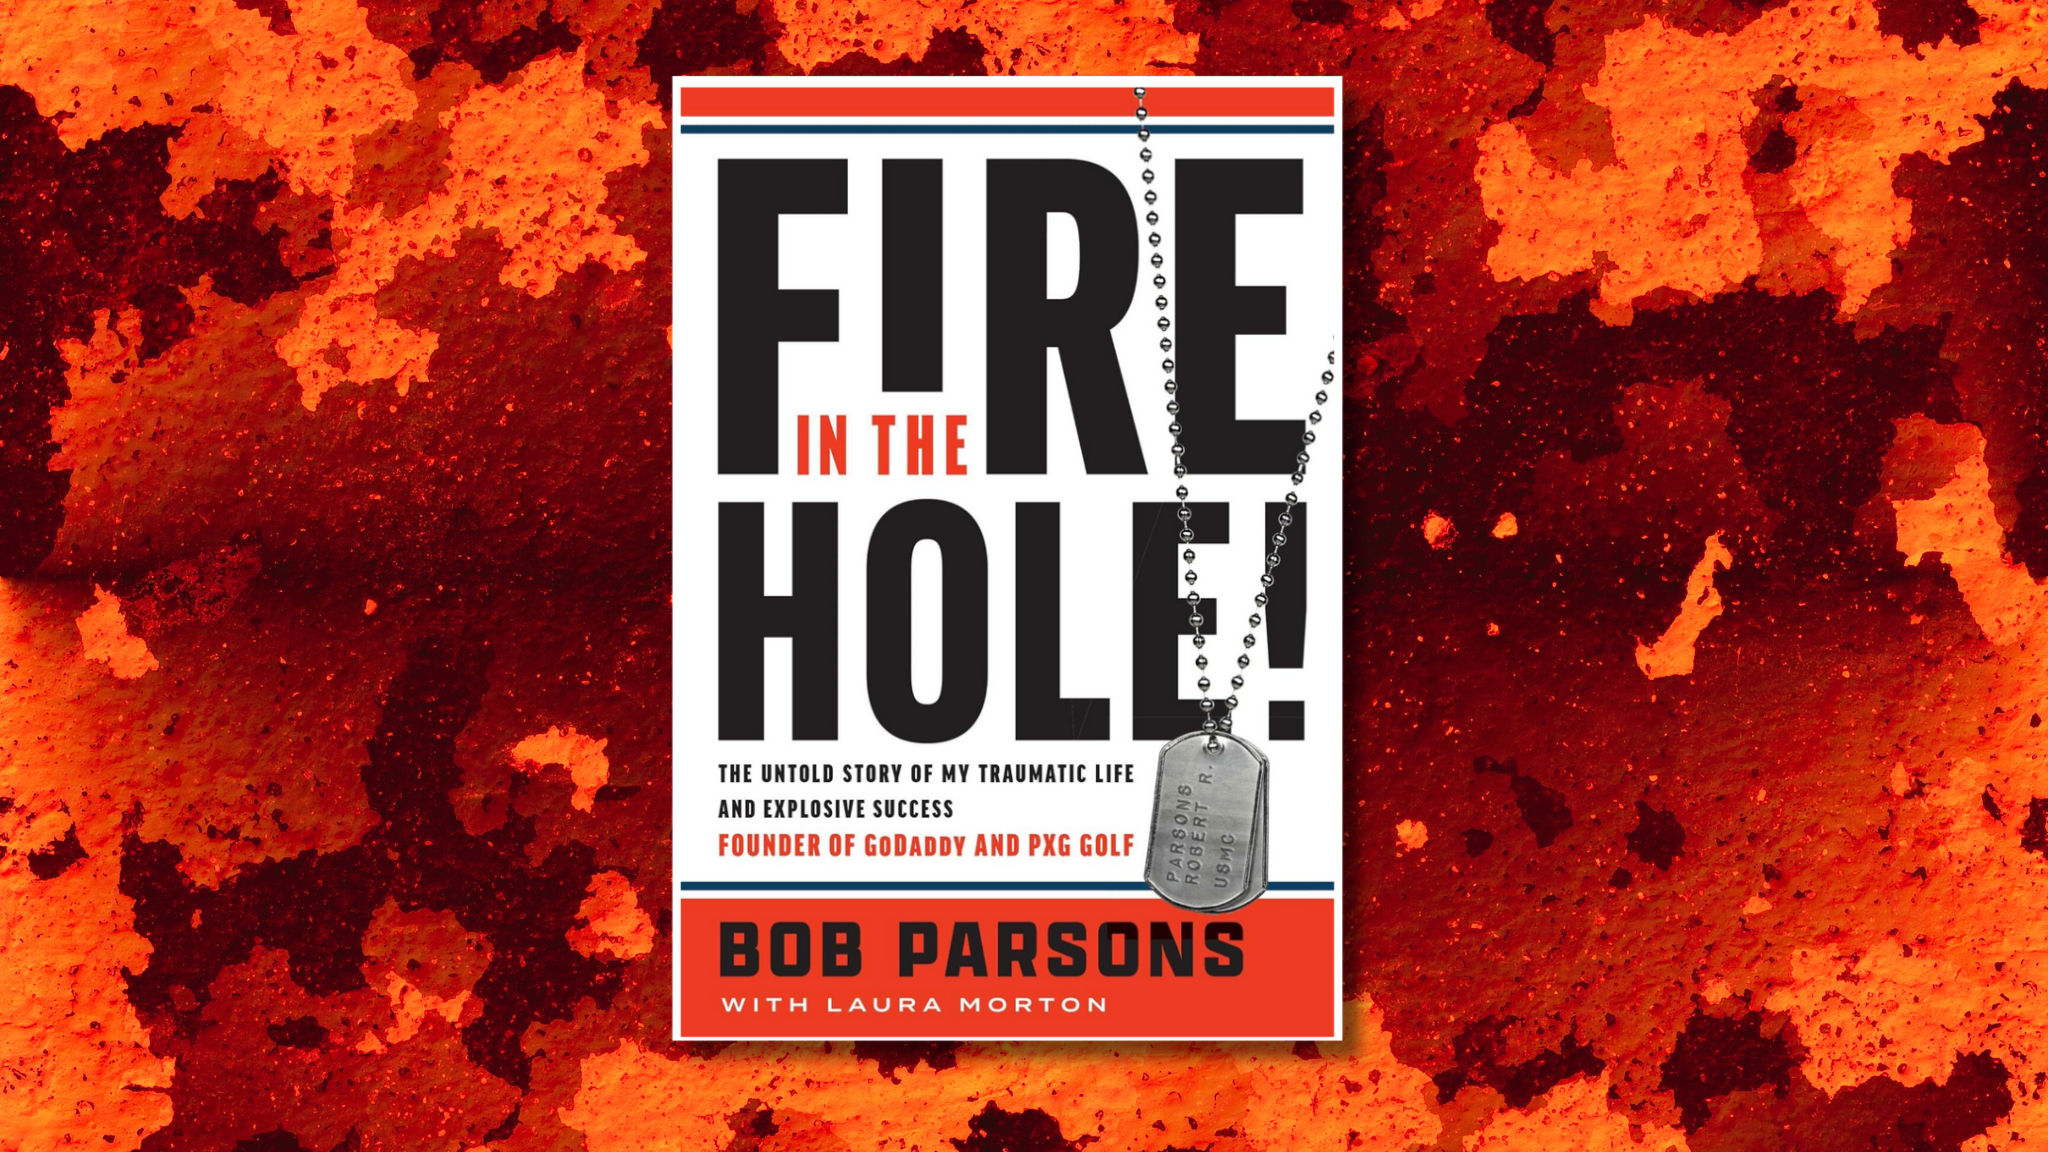 Fire in the Hole! by Bob Parsons Excerpt